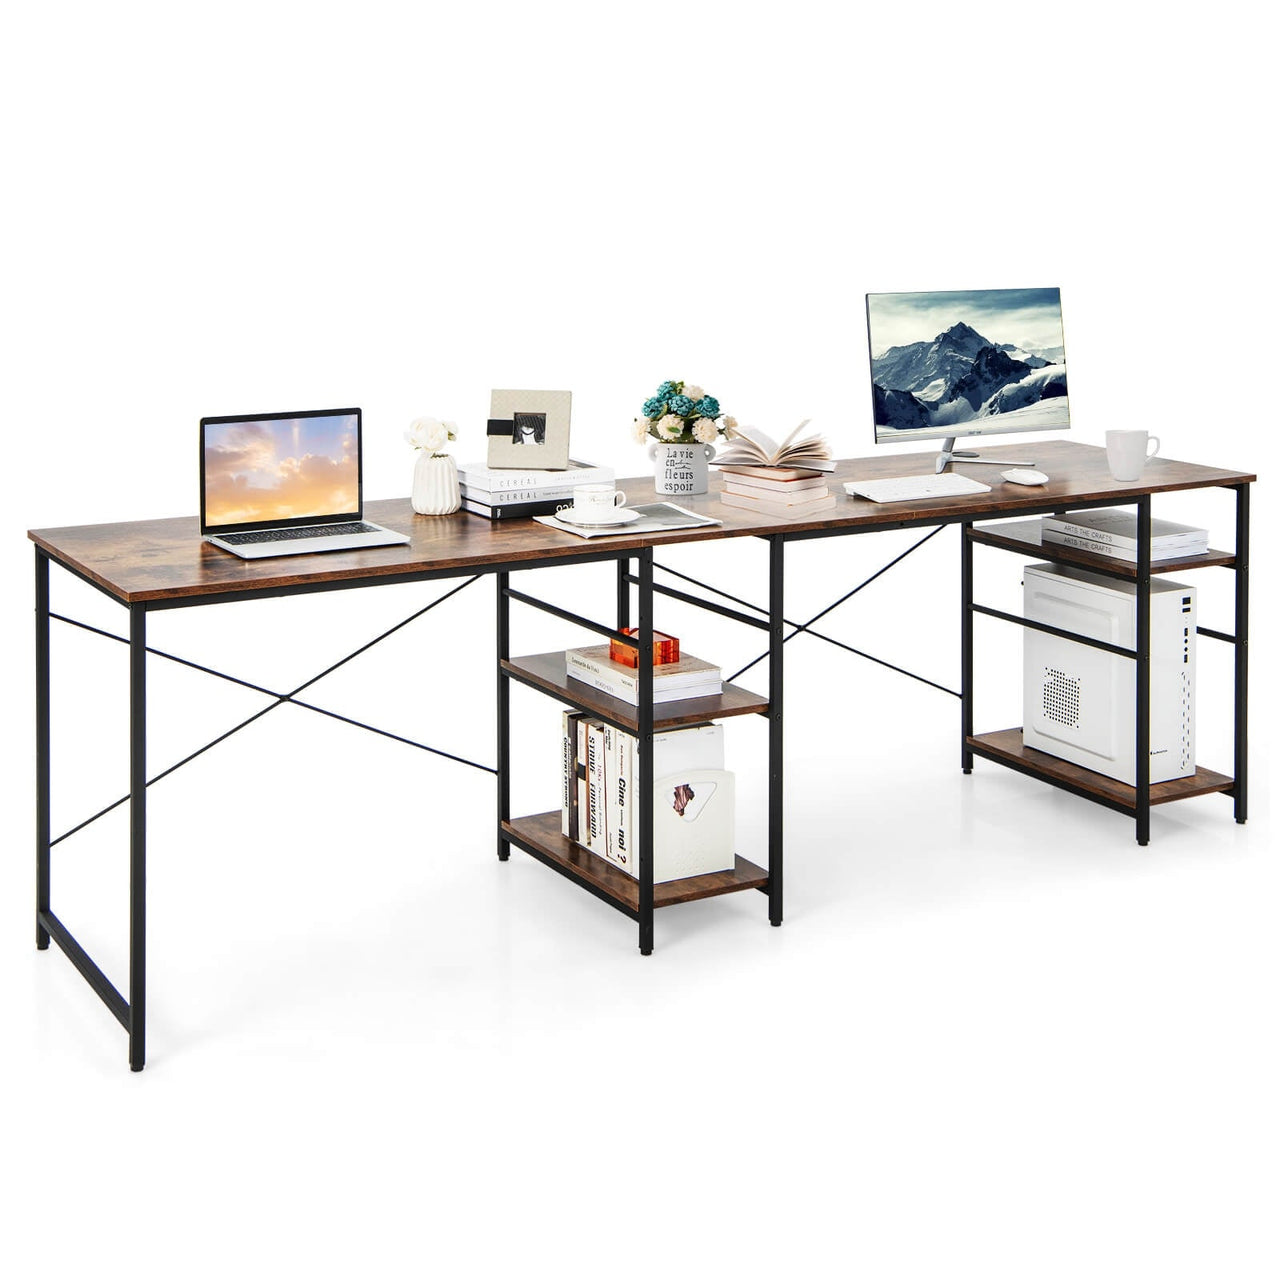 L-Shaped Computer Desk with 4 Storage Shelves and Cable Holes